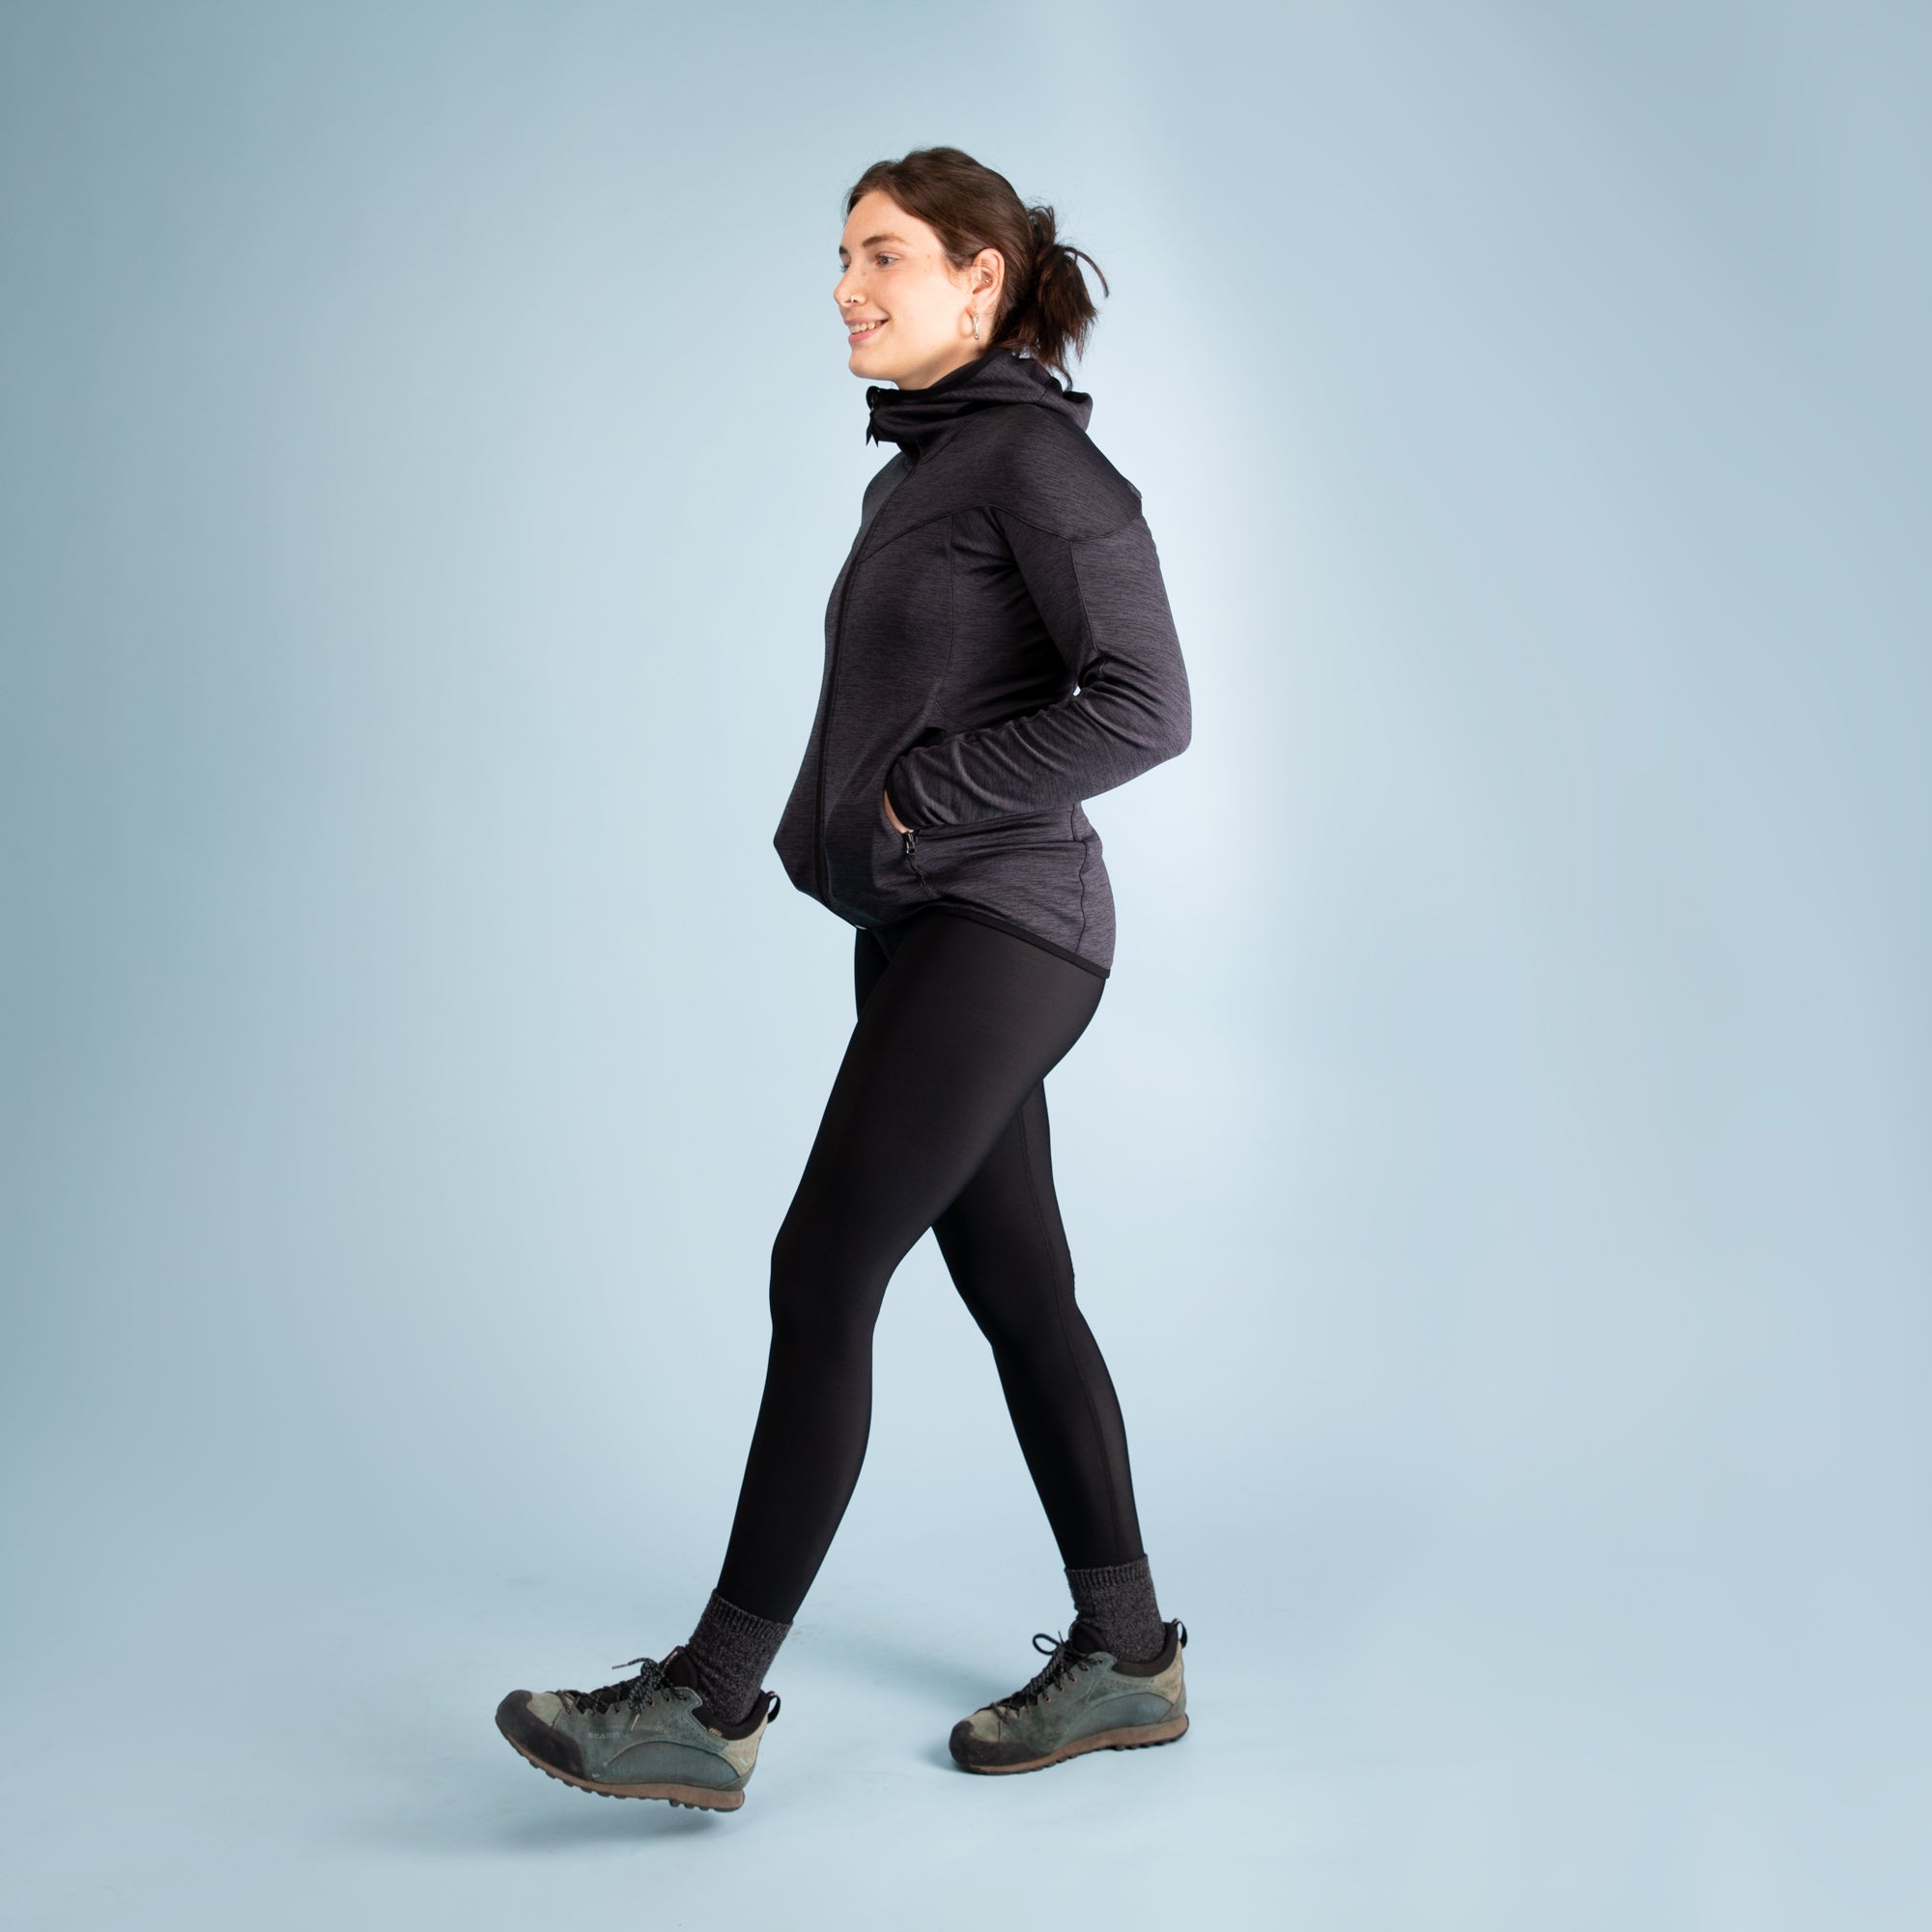 Shopping for winter gear? Don't forget to buy fleece-lined leggings